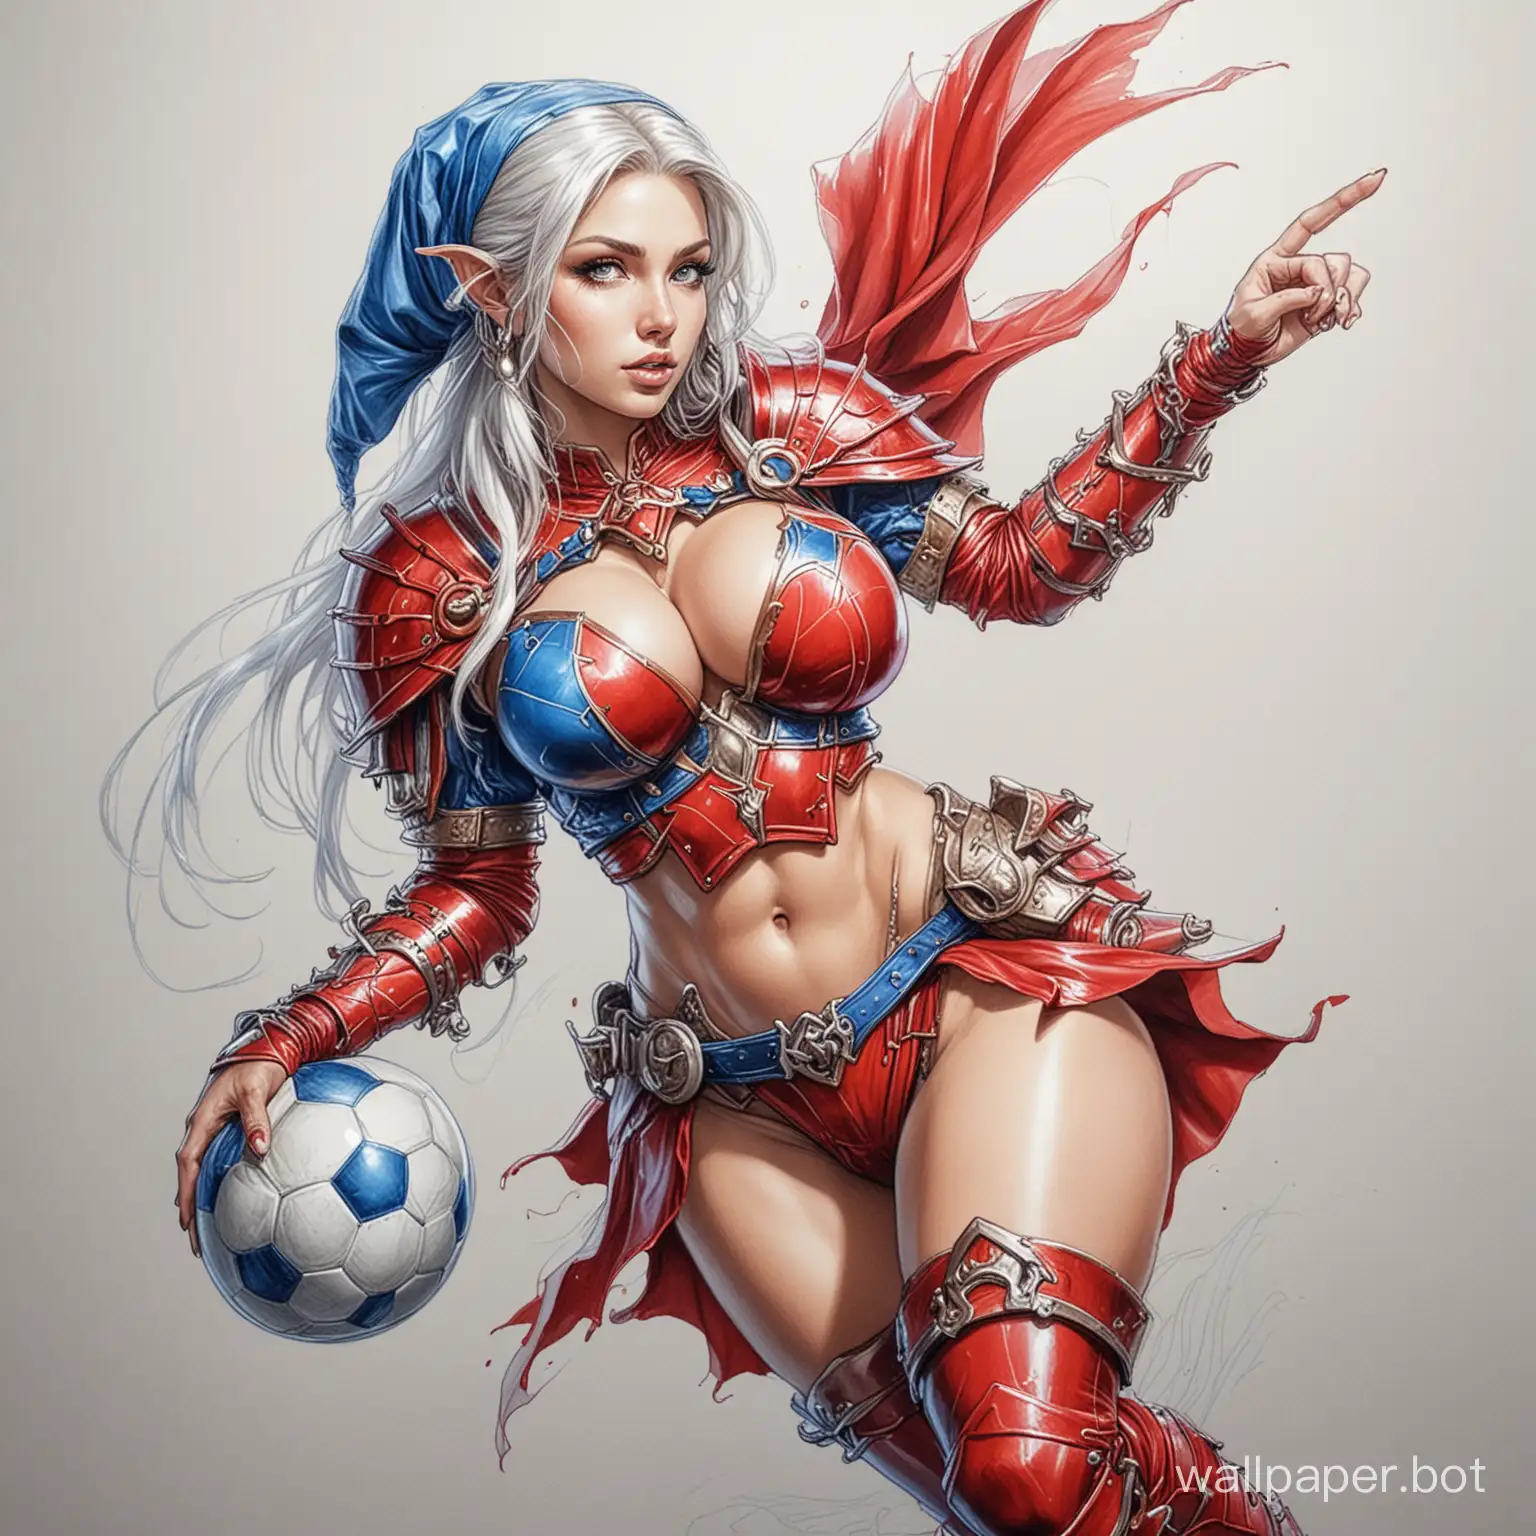 Soccer elf sexy magician in red koan armor with big breasts at speed outperforms a huge
Orc warrior in blue armor and hits the ball hard photo of high extension drawing with marker masterpiece